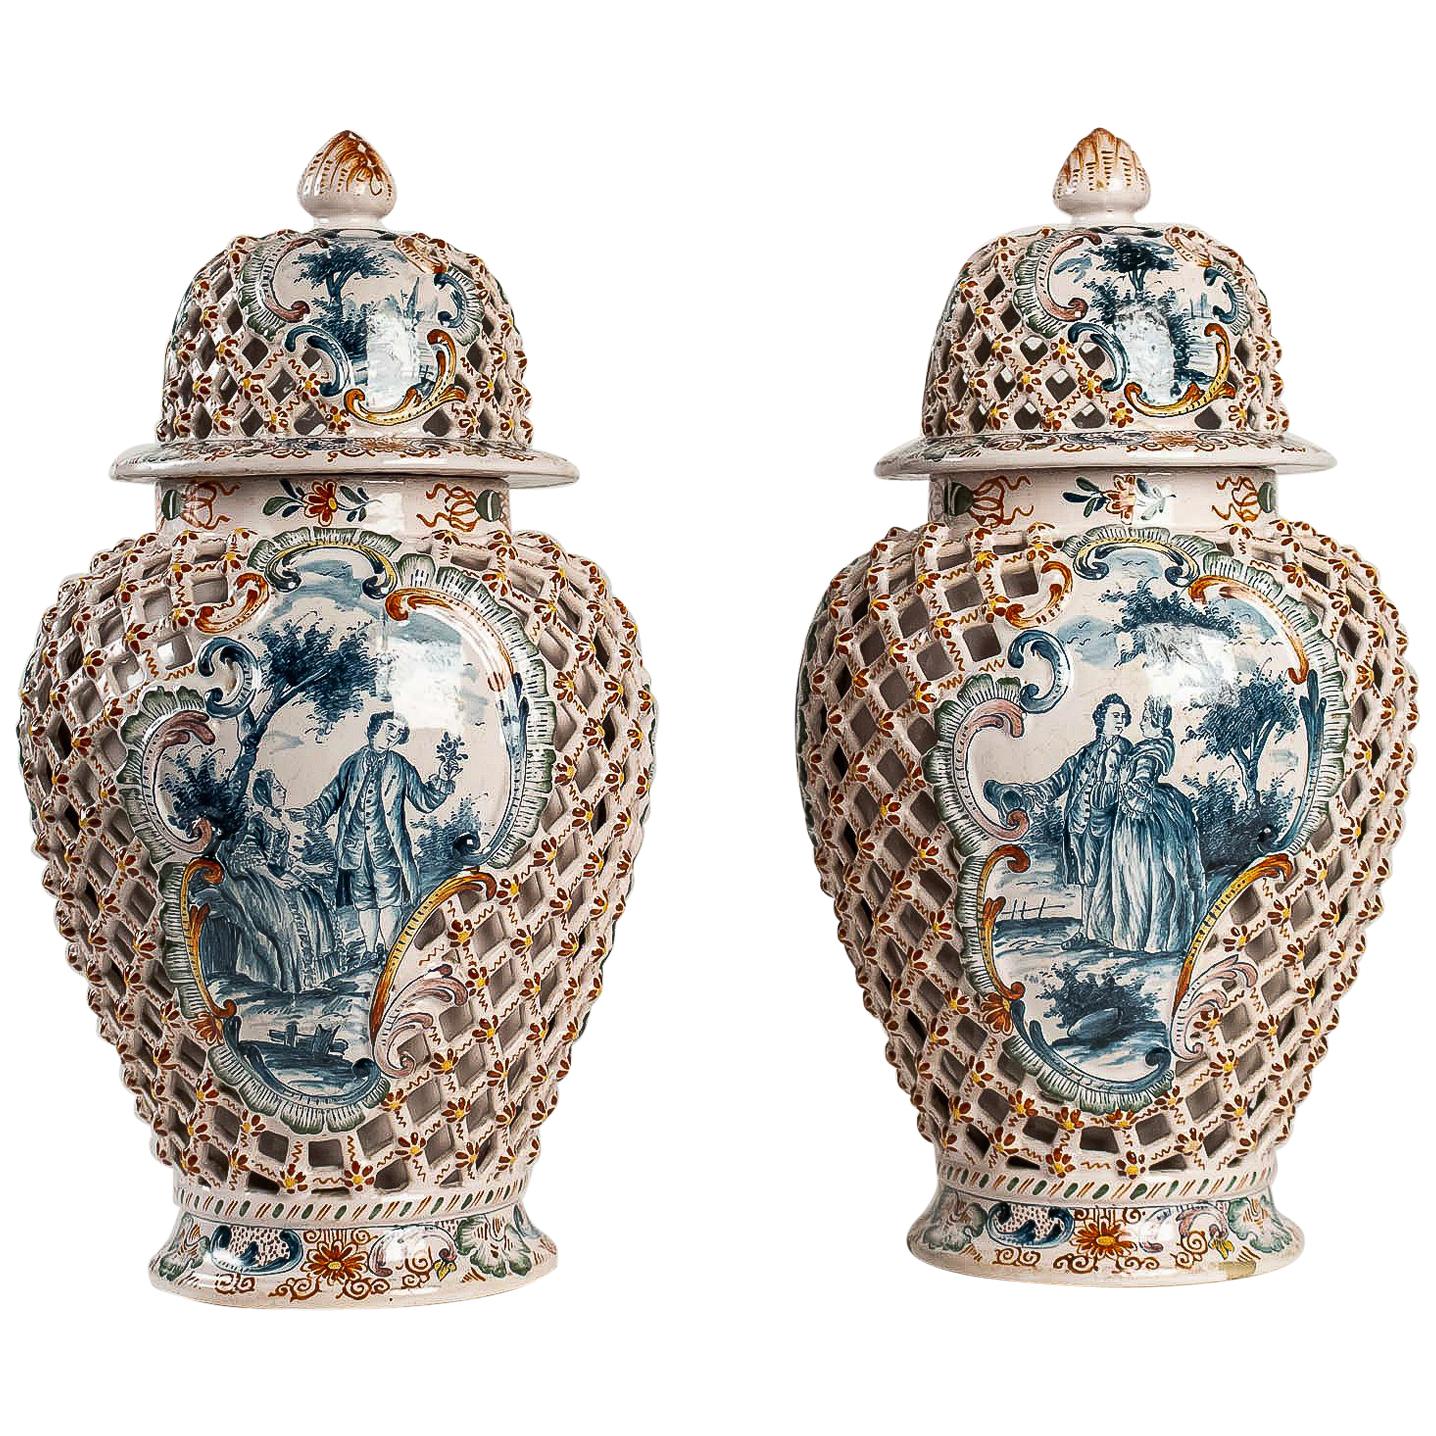 Dutch Early-19th Century Polychrome Delft Faience Pair of Vases, circa 1810-1818